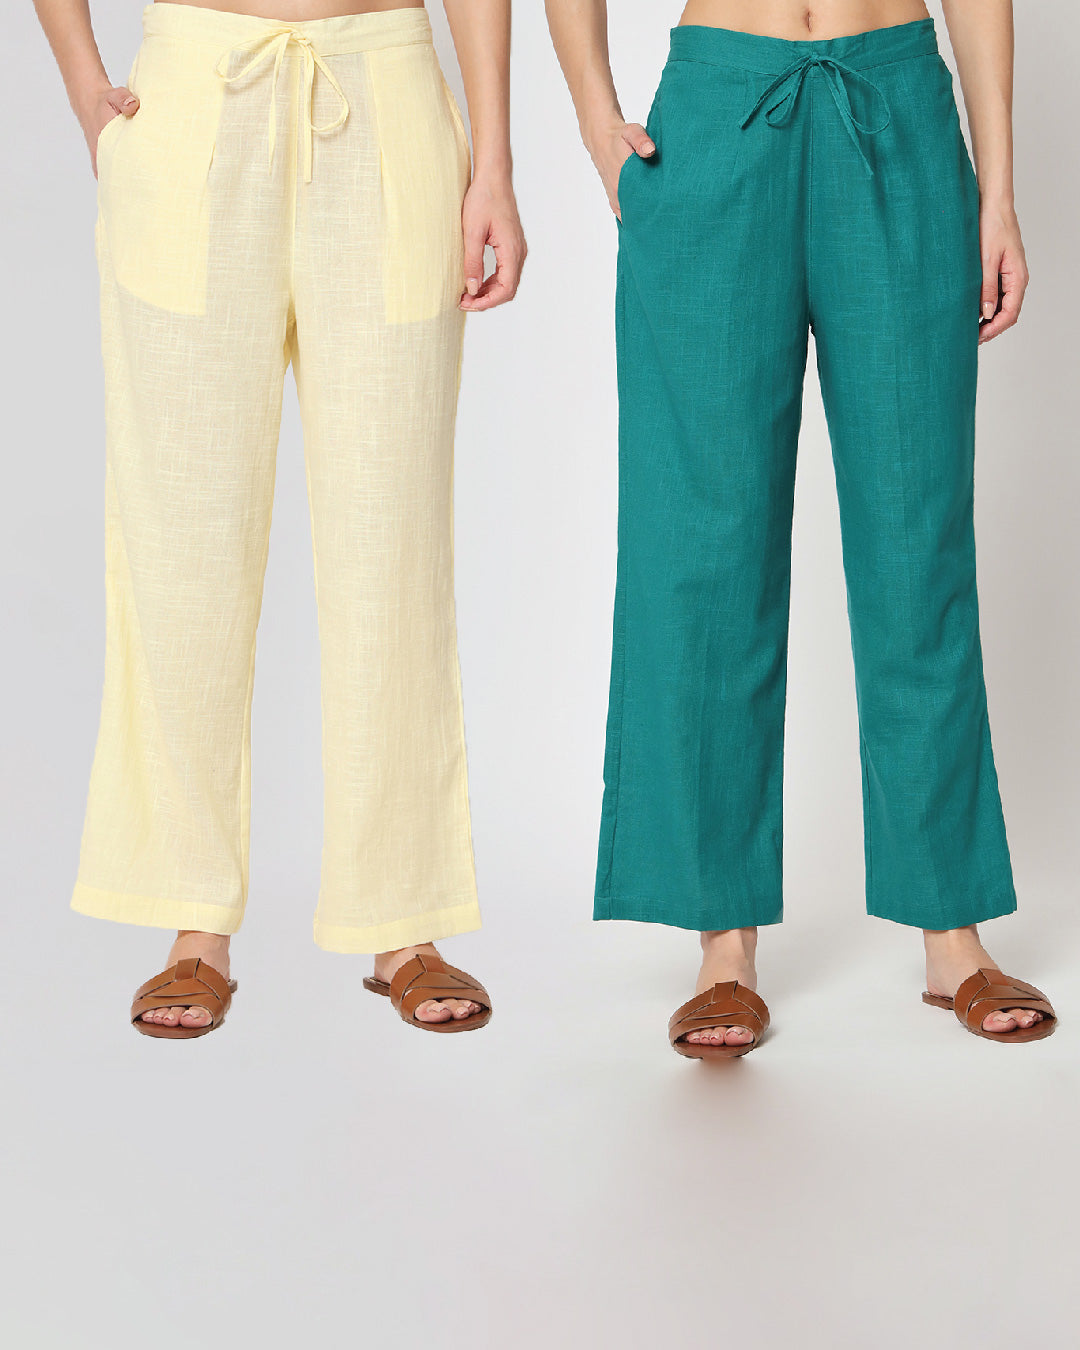 Combo: Airy Lemon & Forest Green Straight Pants- Set of 2